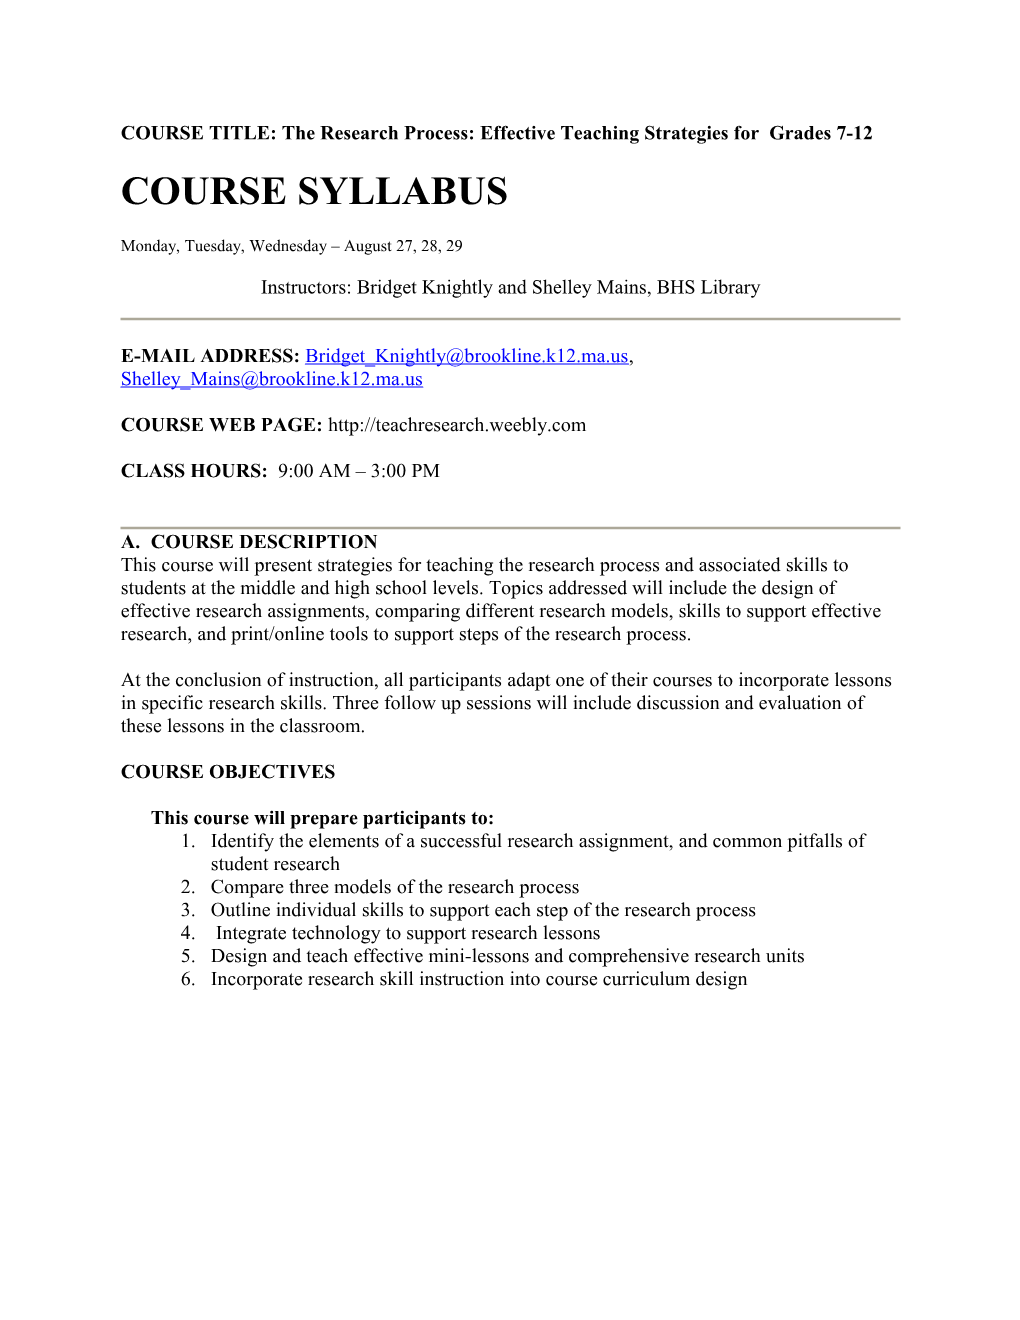 COURSE TITLE: the Research Process: Effective Teaching Strategies for Grades 7-12